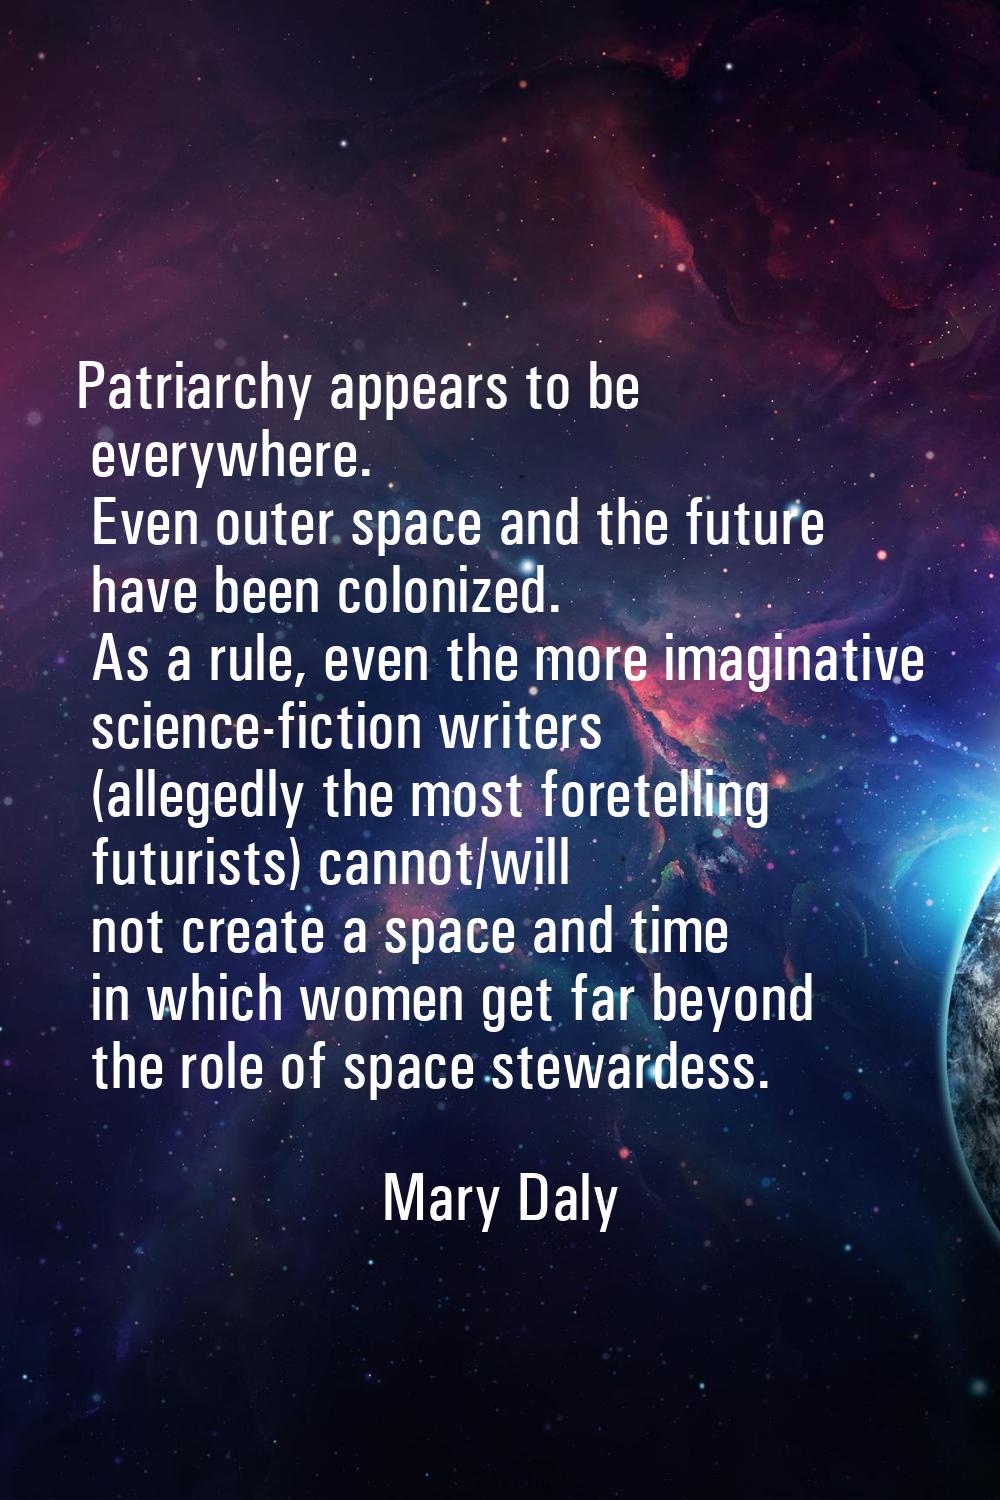 Patriarchy appears to be everywhere. Even outer space and the future have been colonized. As a rule